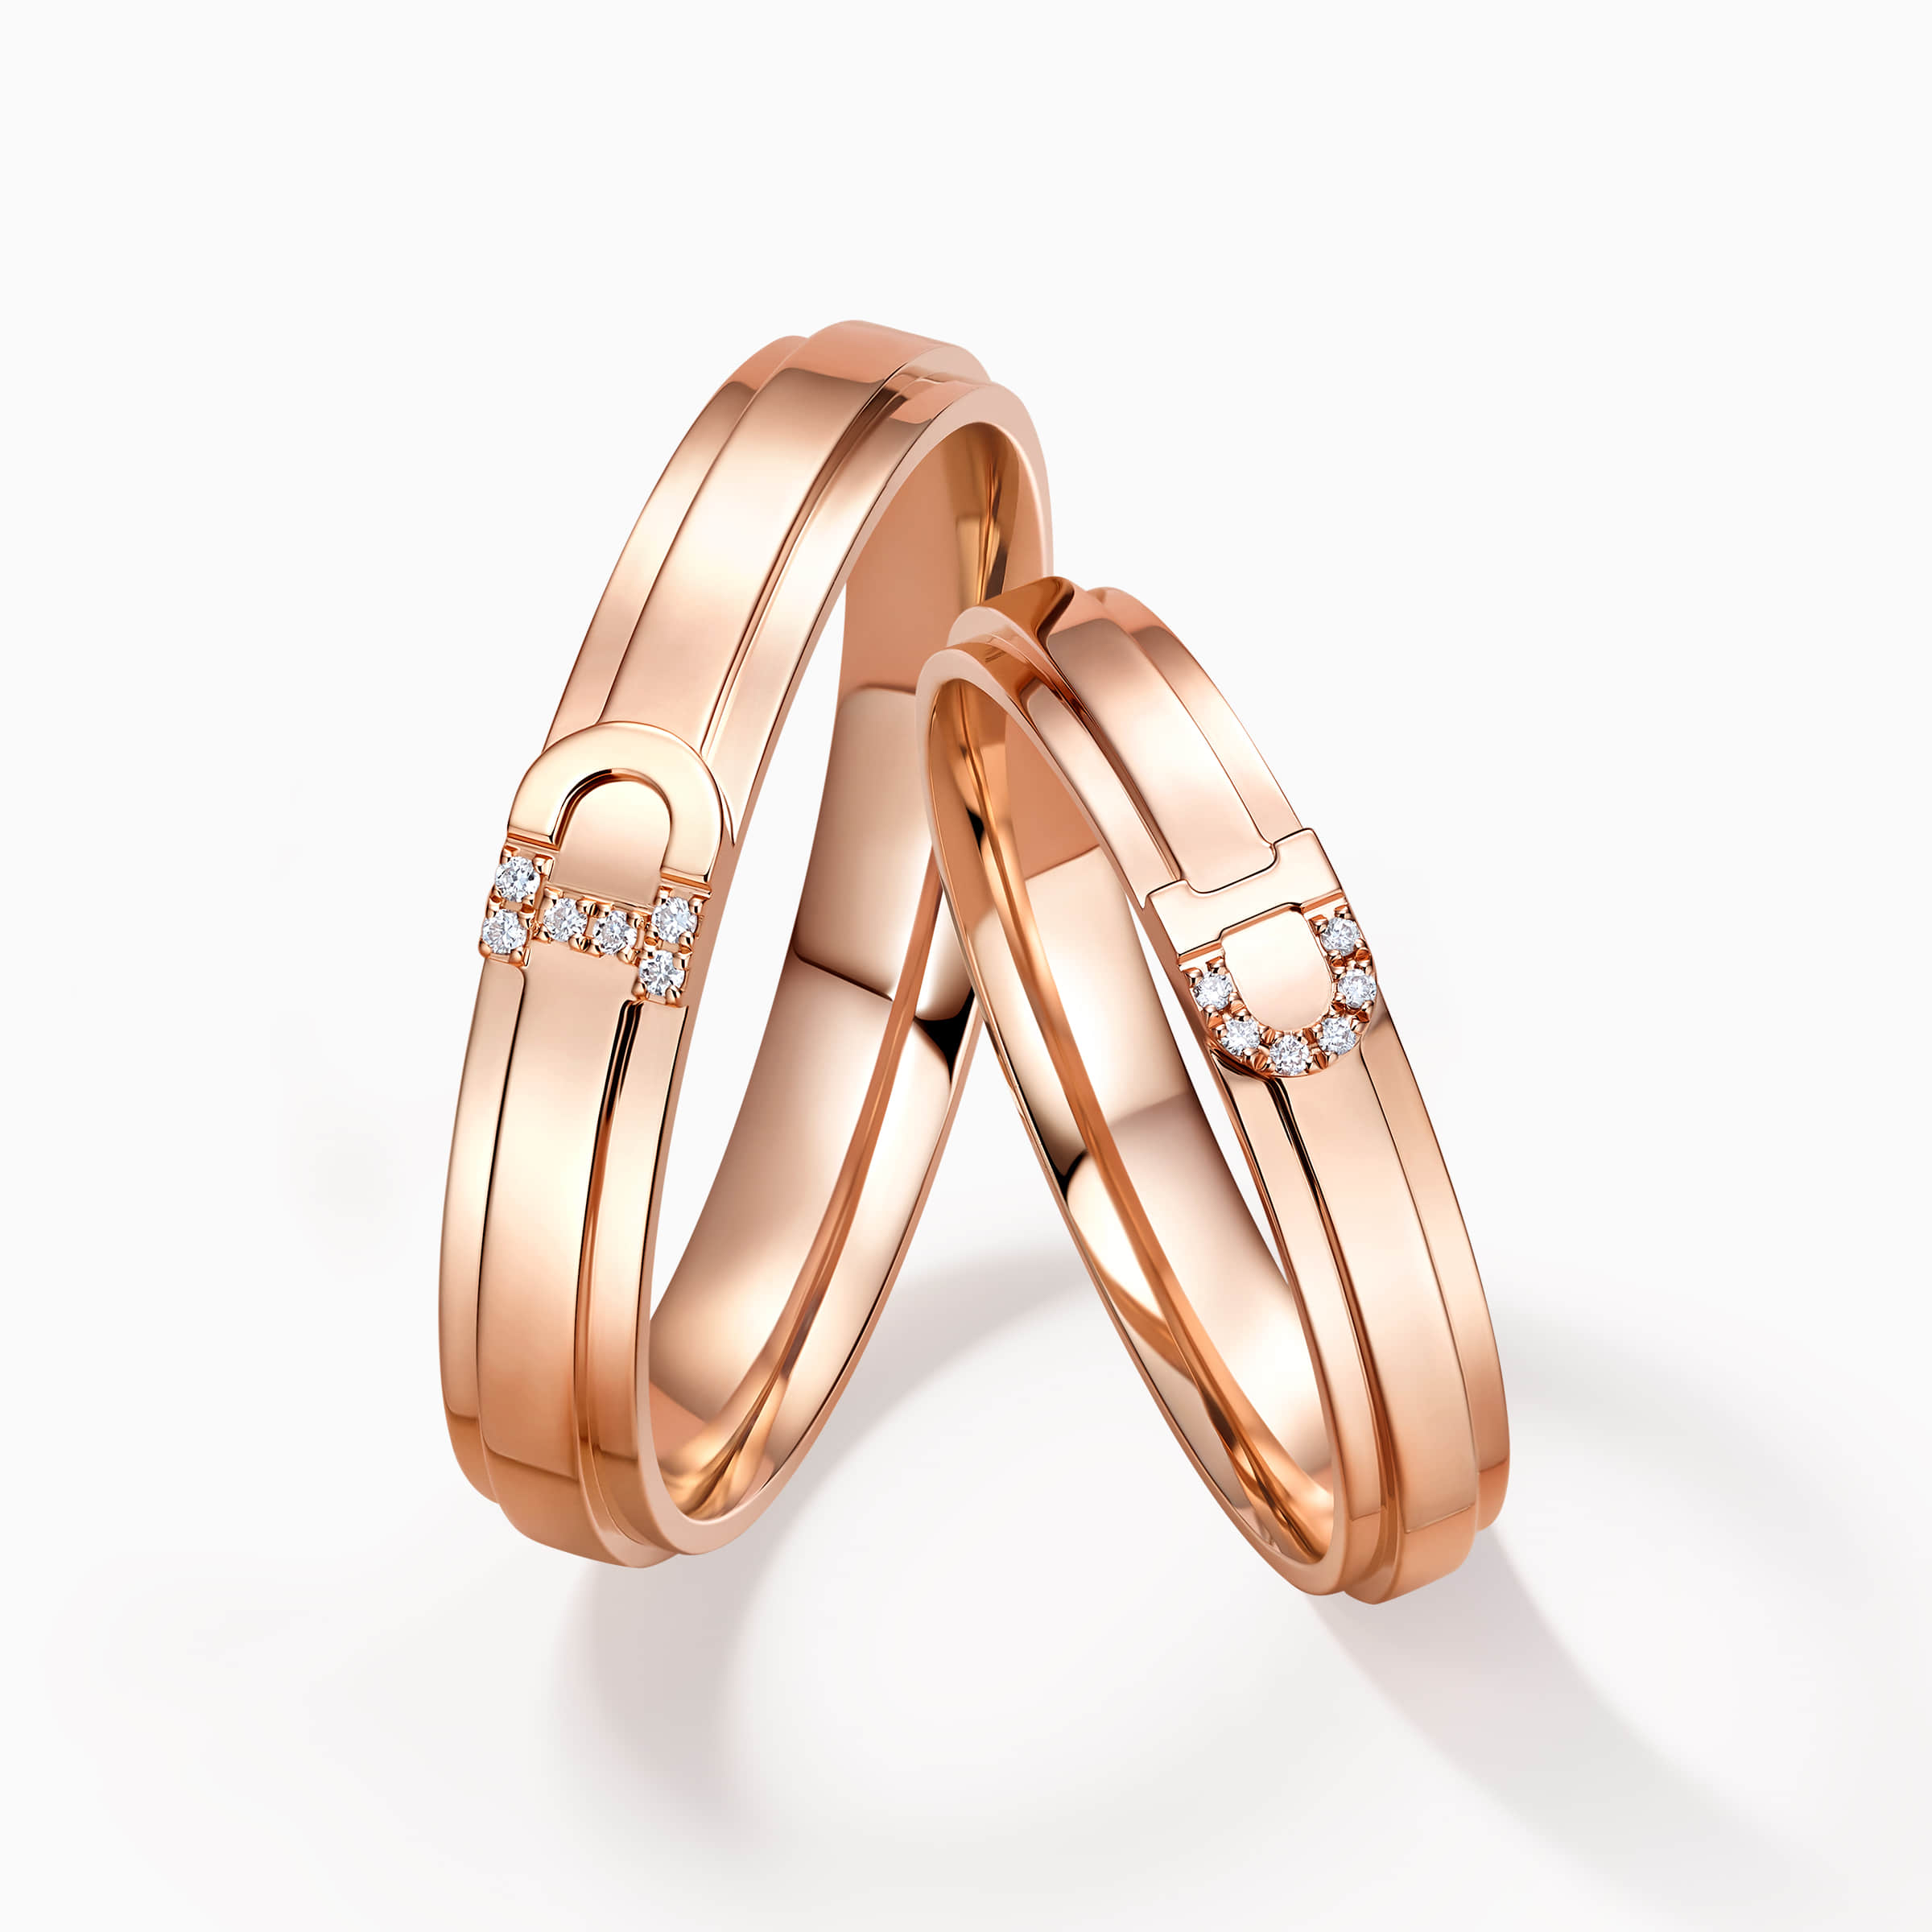 Darry Ring rose gold wedding ring sets for him and her